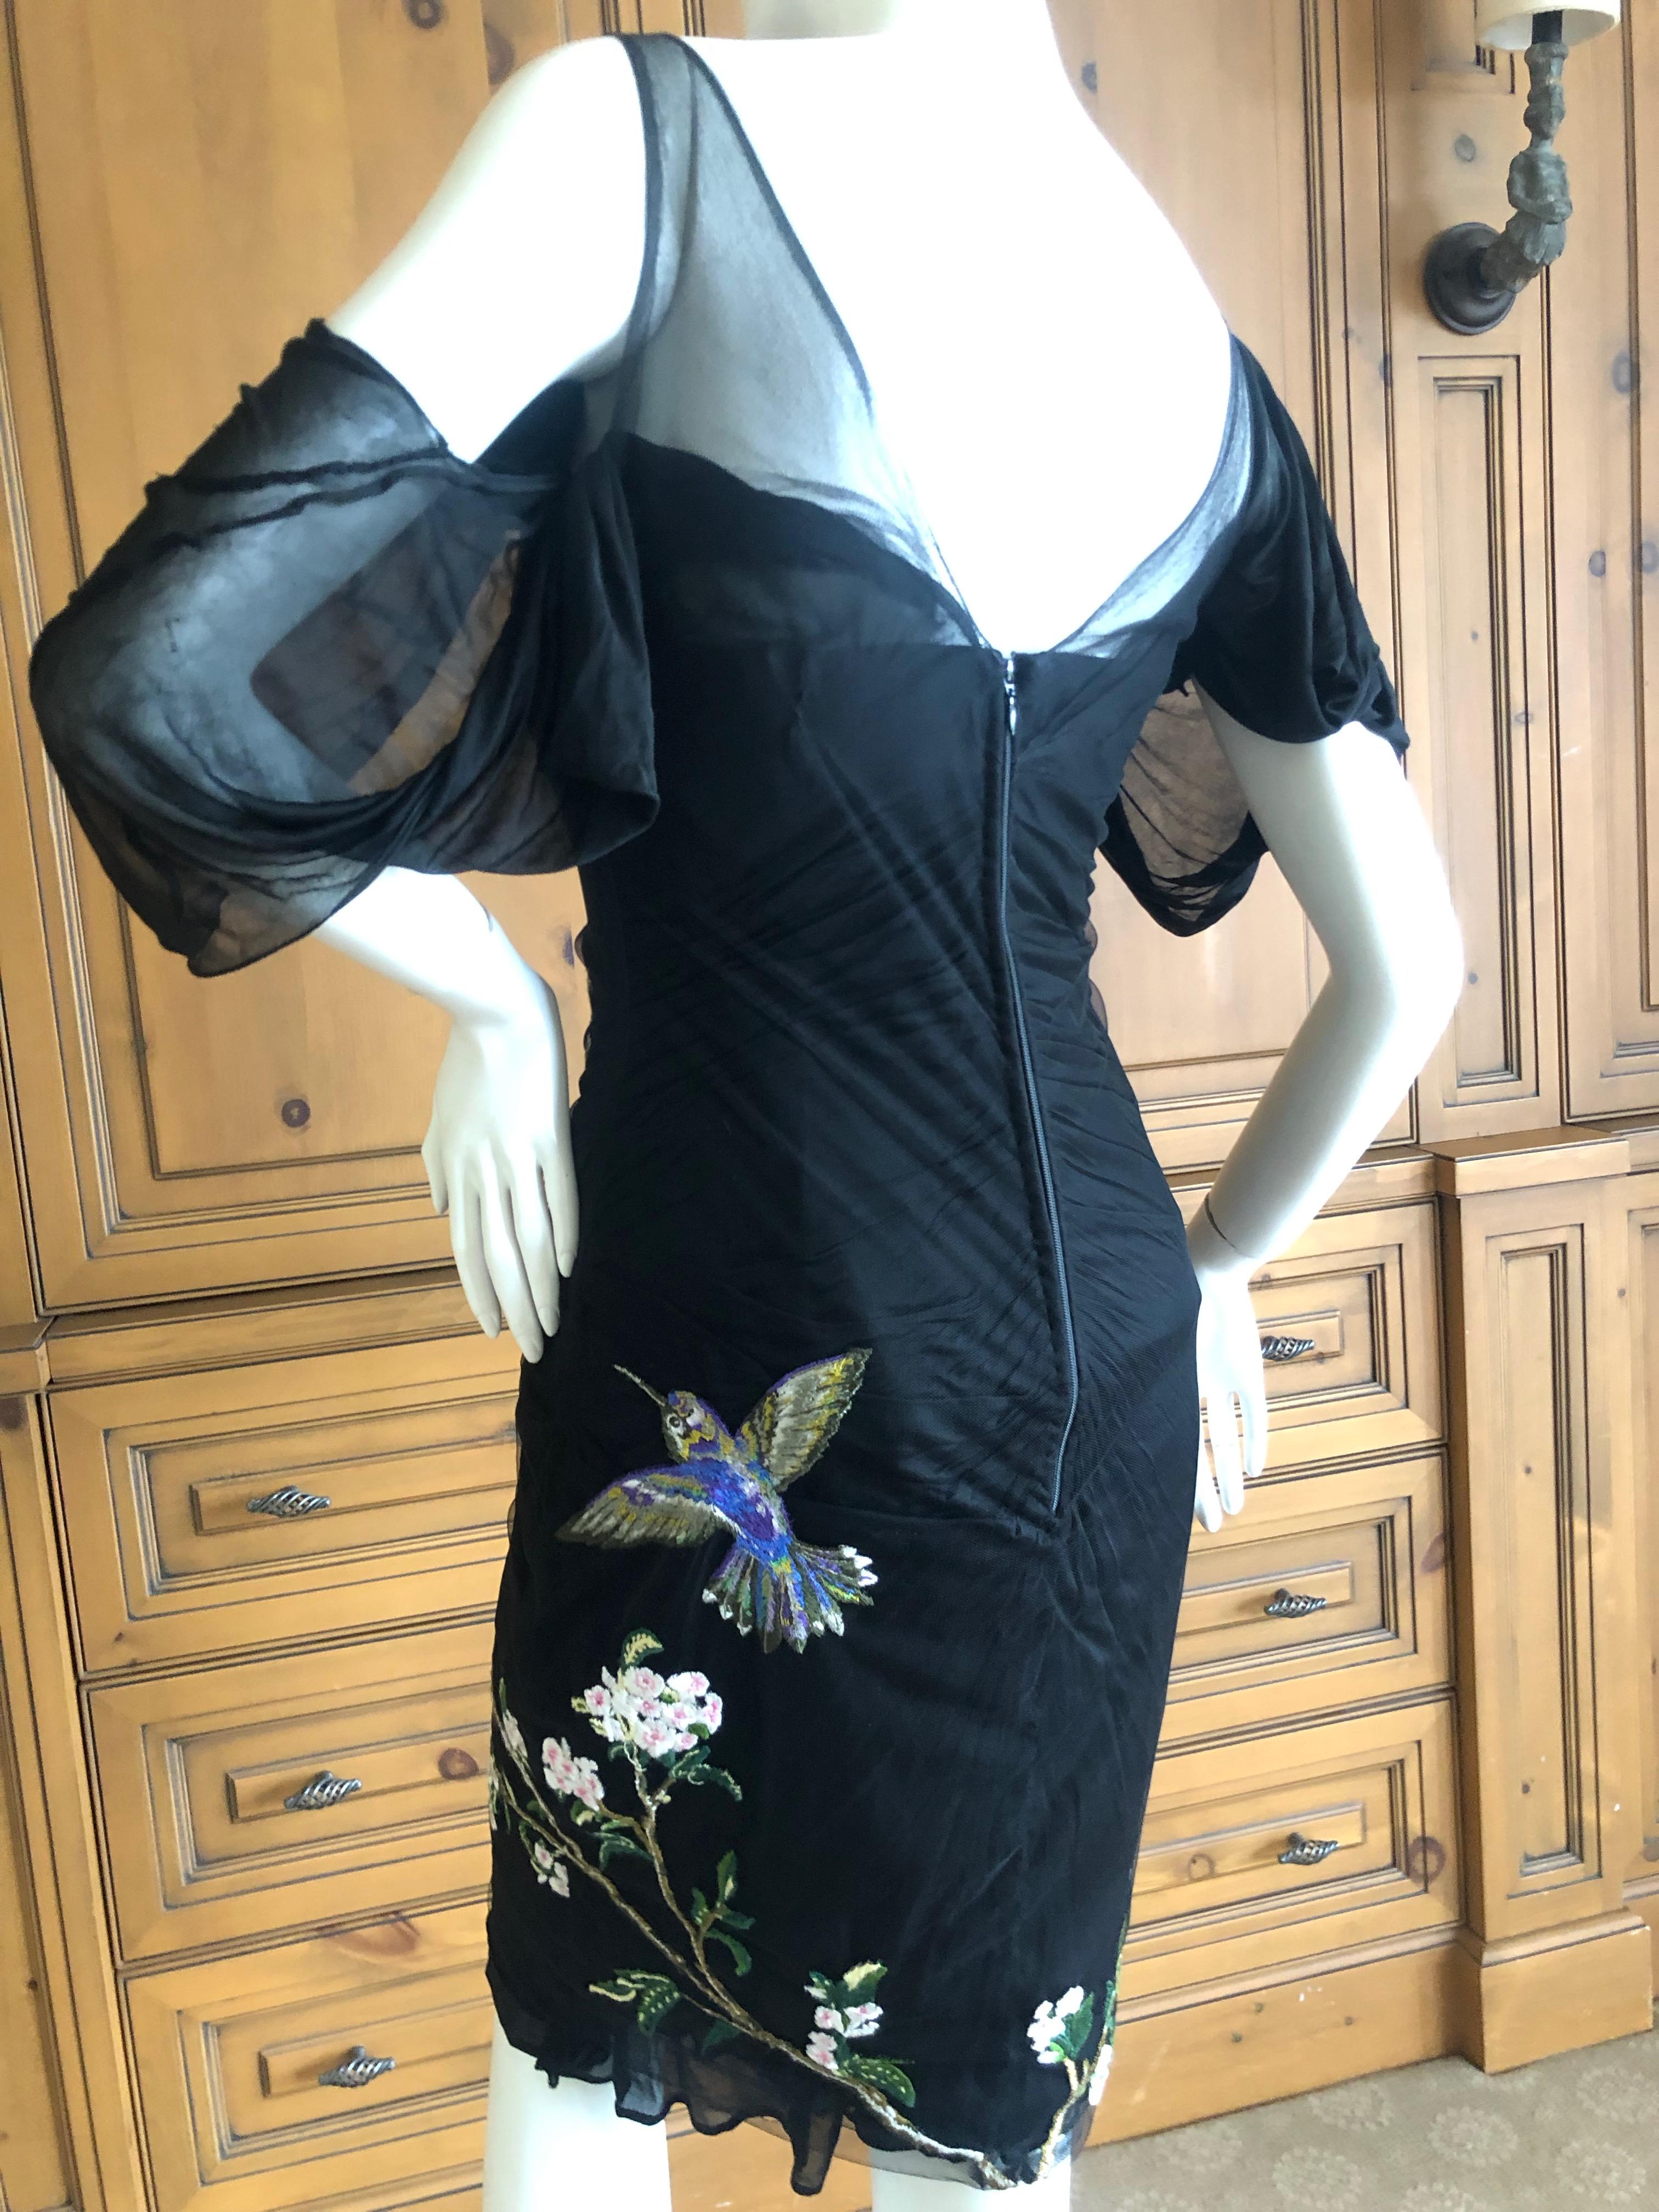 Alexander McQueen 2009 Hummingbird Embroidered Little Black Corset Dress In Excellent Condition For Sale In Cloverdale, CA